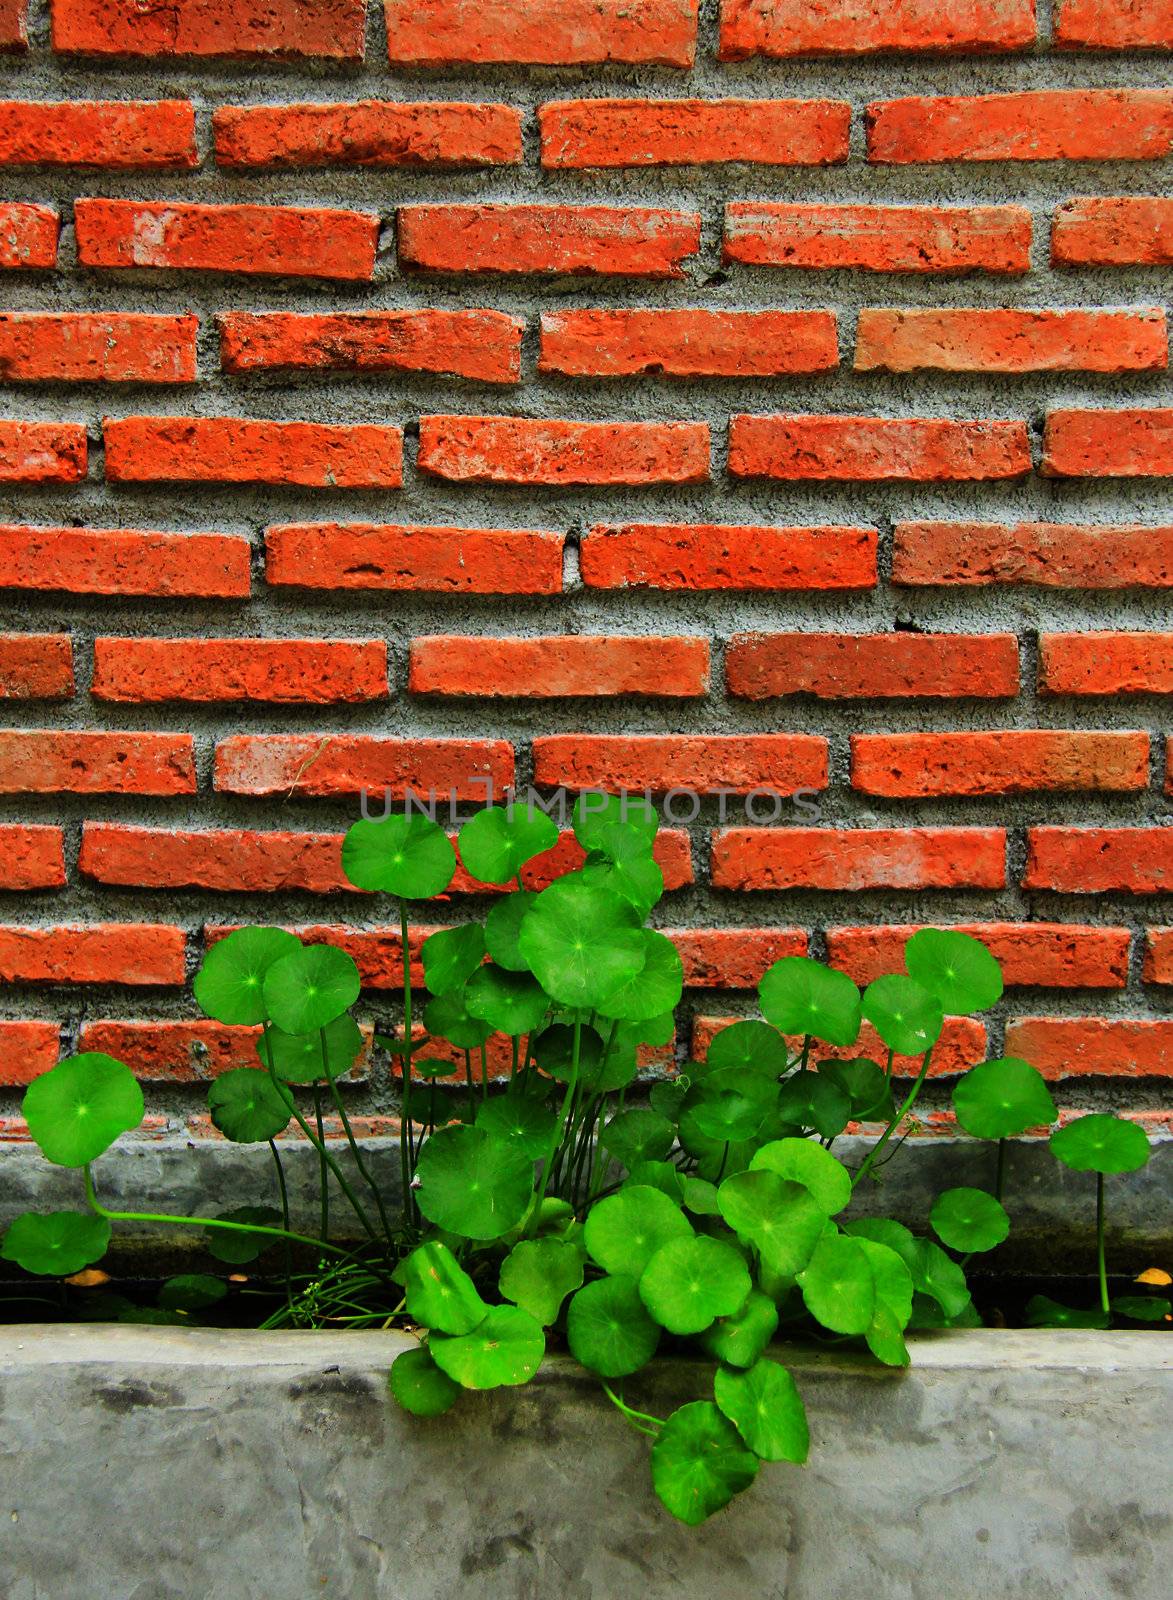 Water plants with brick wall by nuchylee